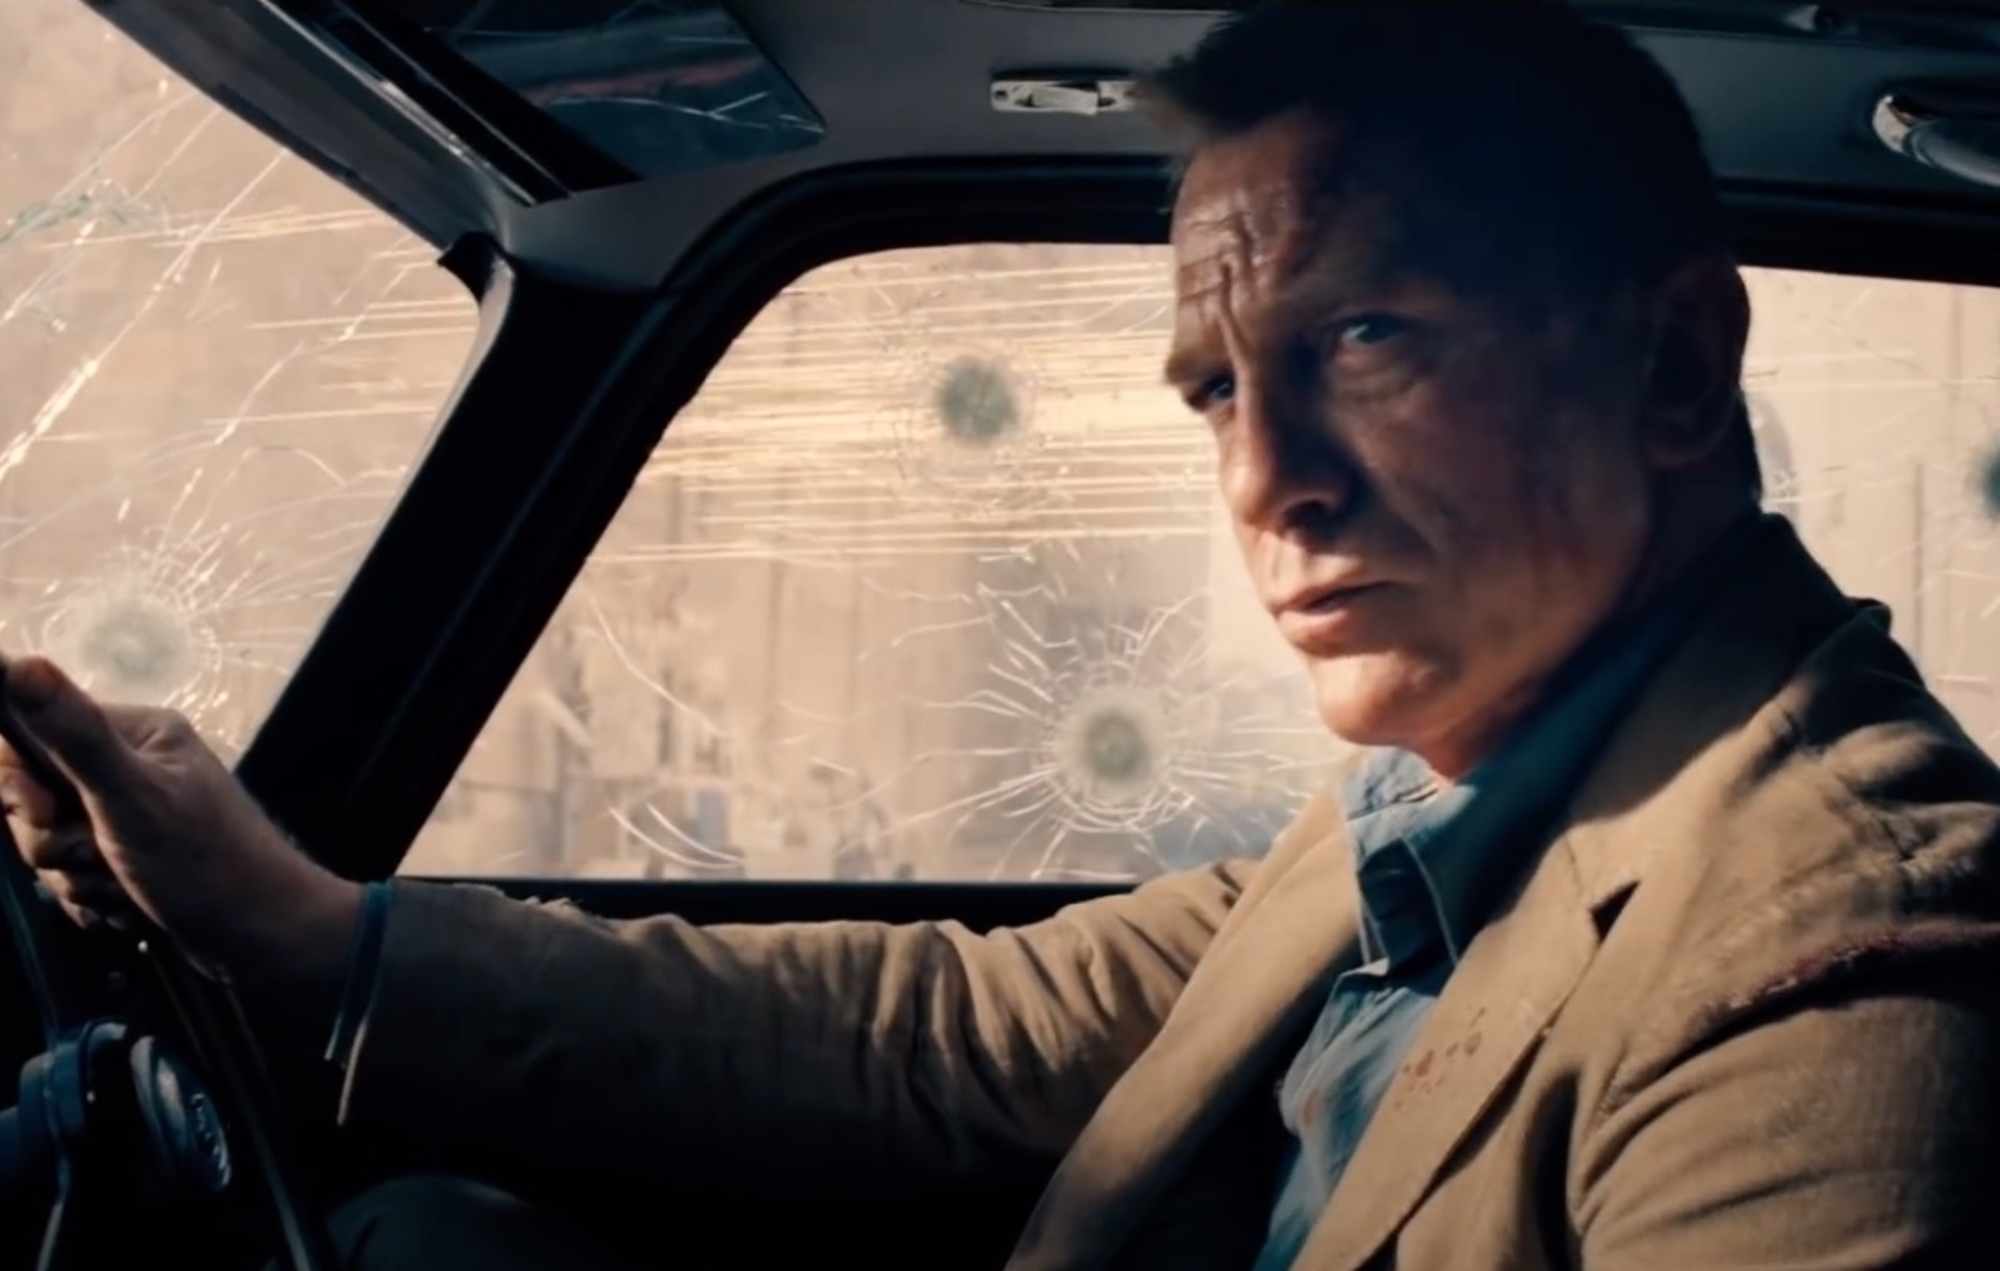 James Bond: 'No Time To Die' delay reportedly costing studio around $1m per month in interest